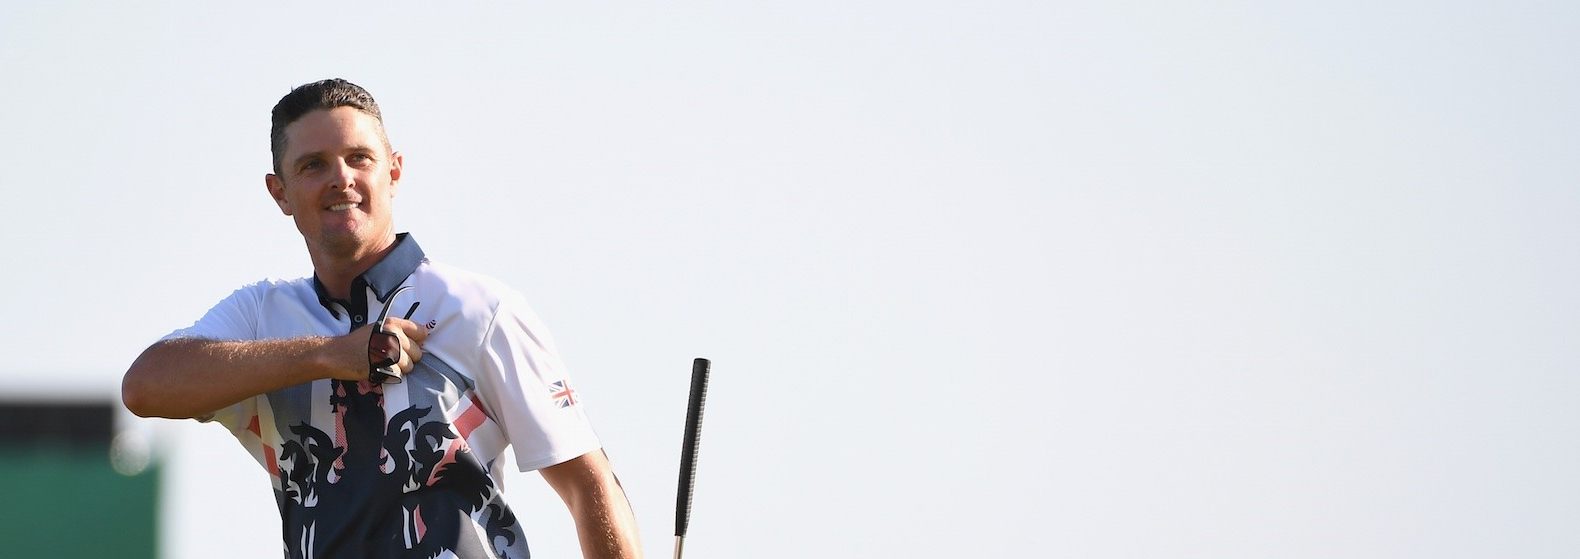 Justin Rose Olympic Champion Getty images